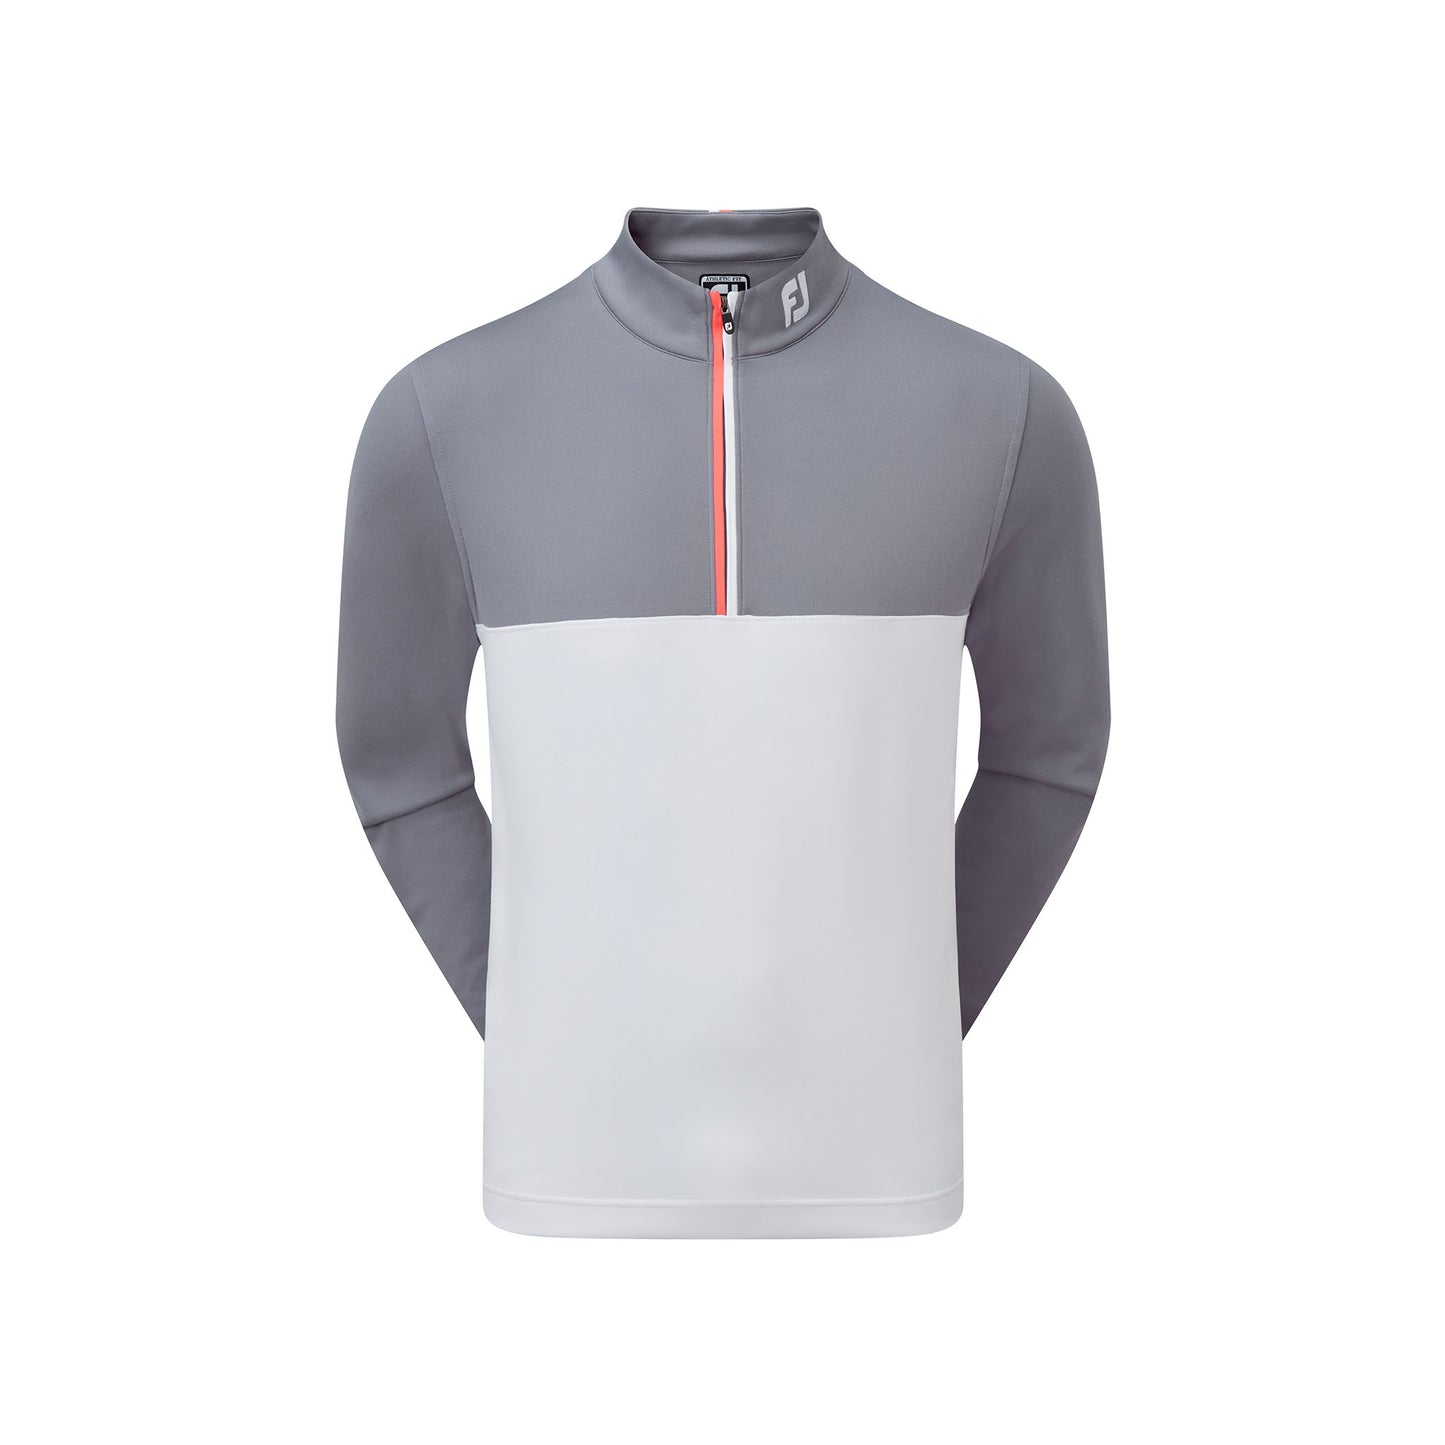 Footjoy Midlayer Colour Block Chill-out